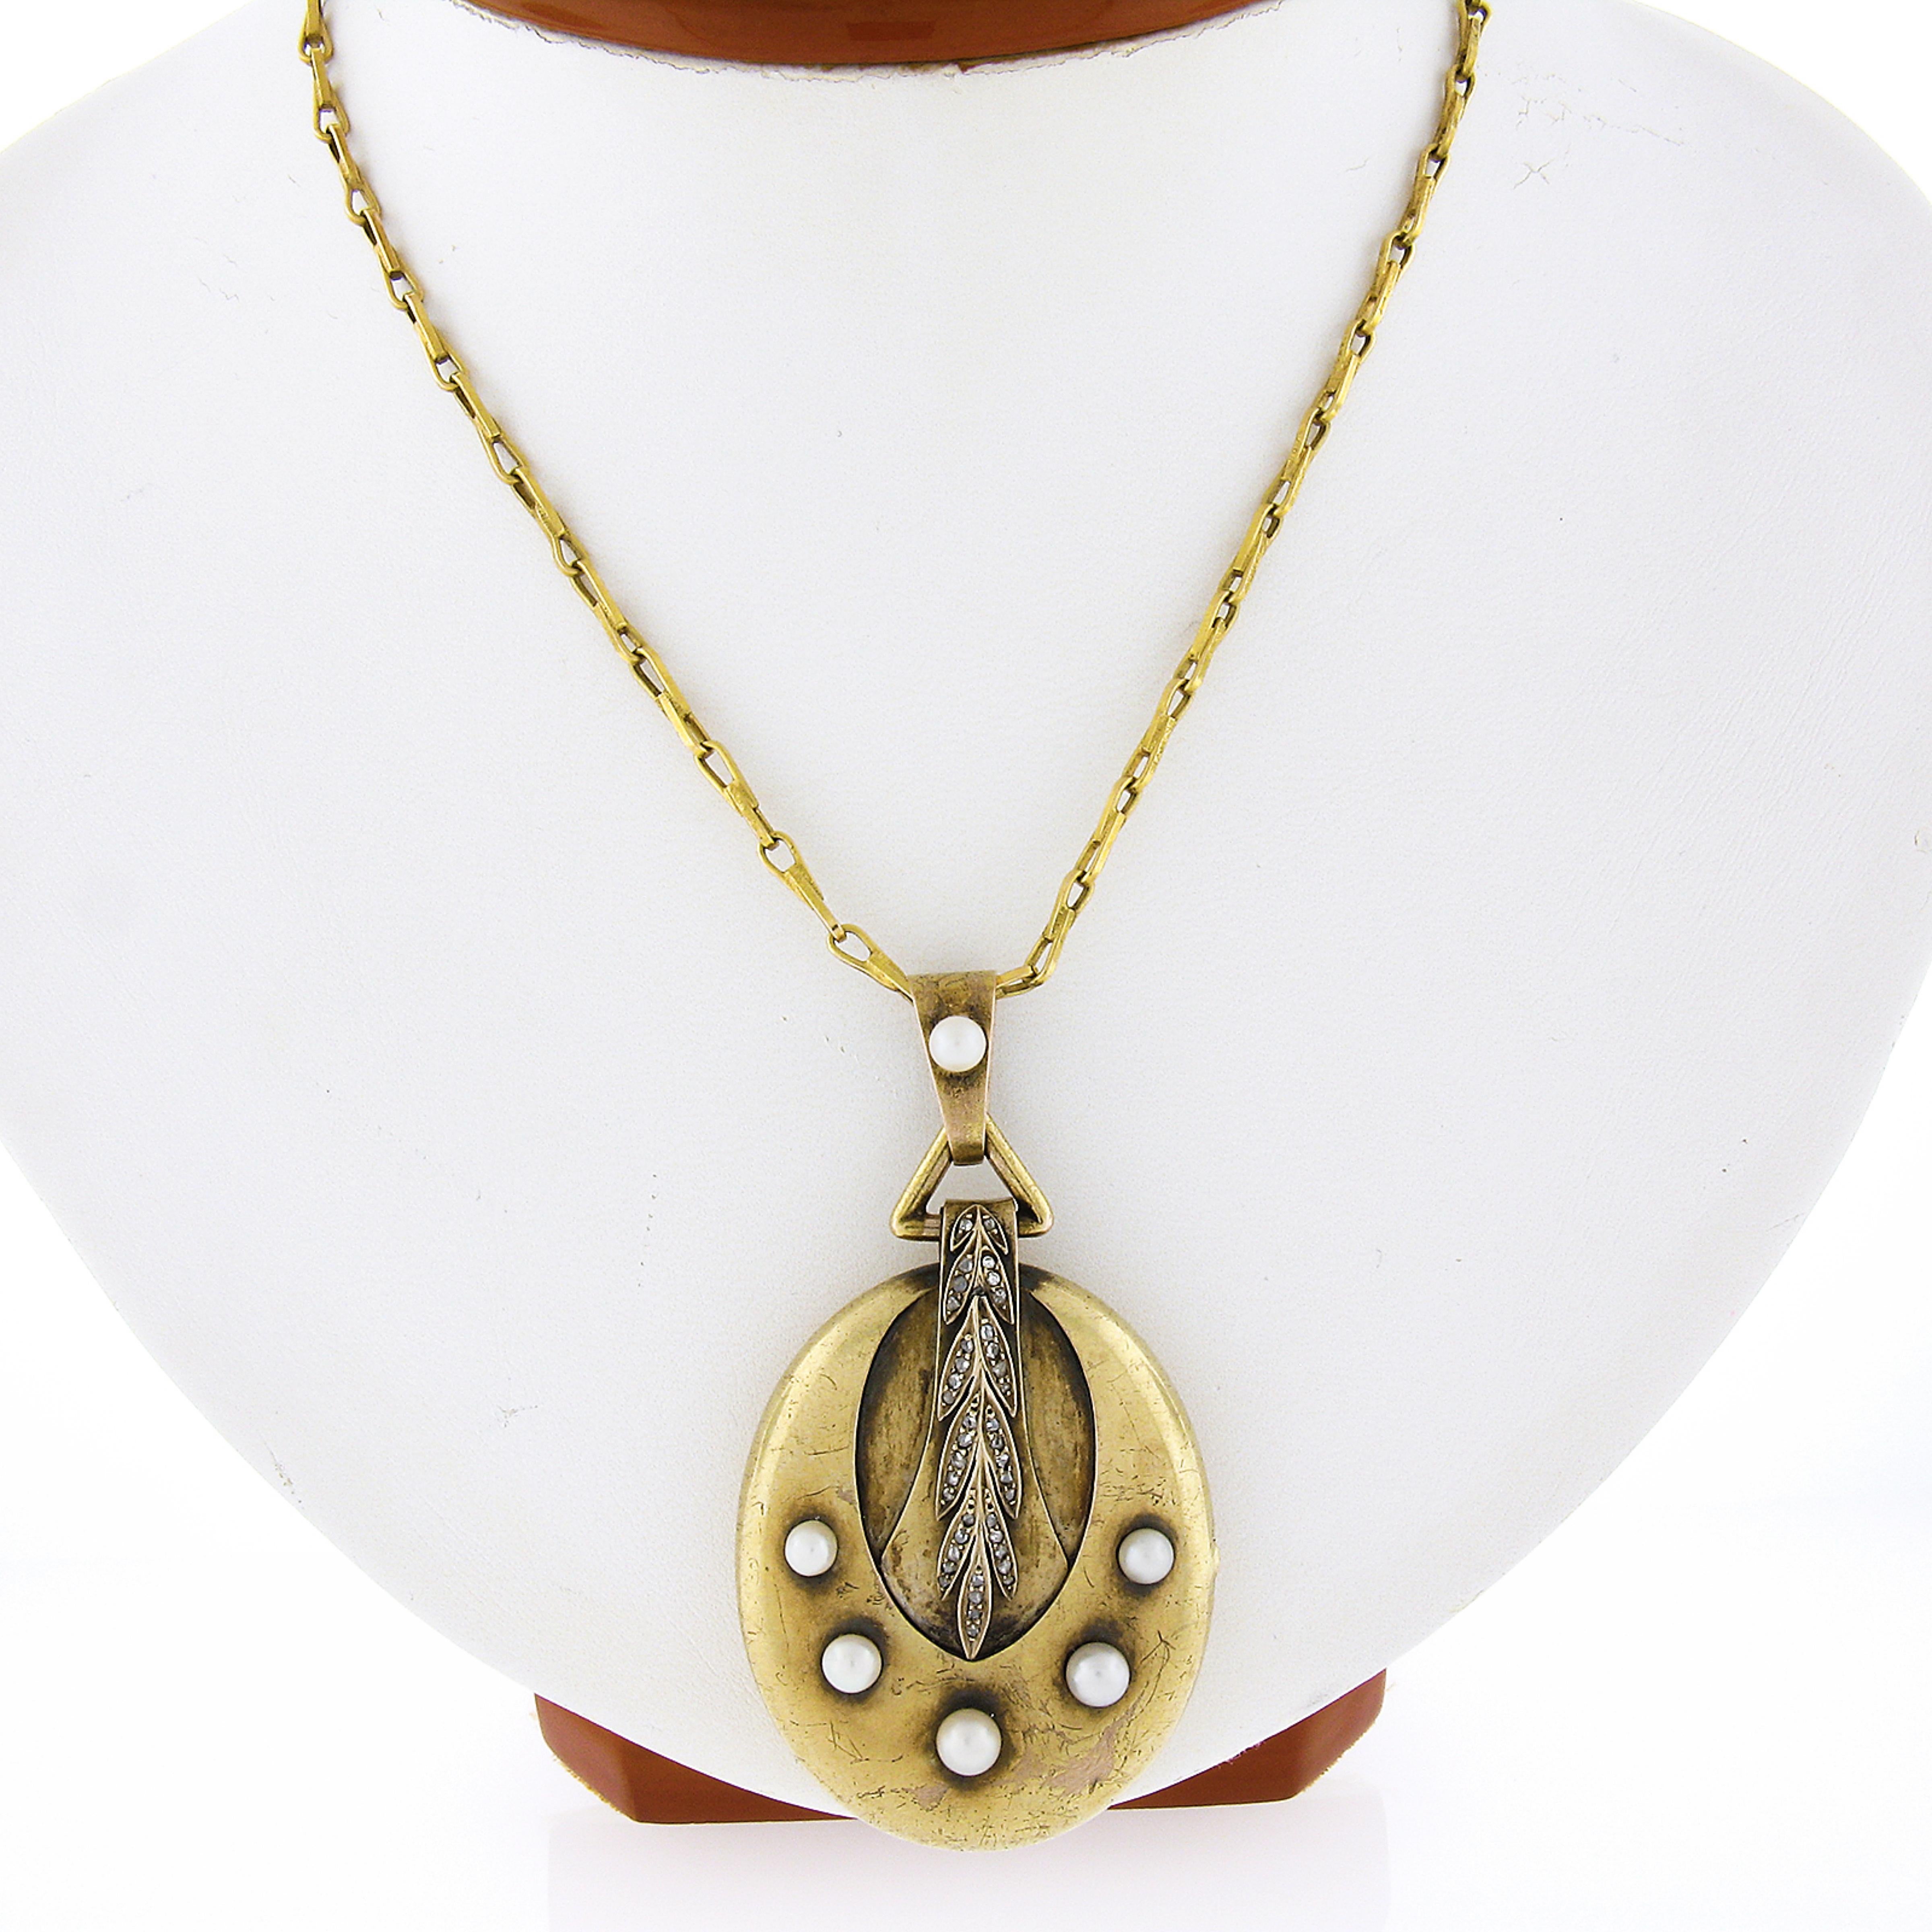 This large and unique antique pendant necklace was crafted in solid 14k yellow gold during the Victorian era and features an oval locket adorned with cultures pearls and numerous old rose cut diamonds pave set in the wonderful wheat designs across